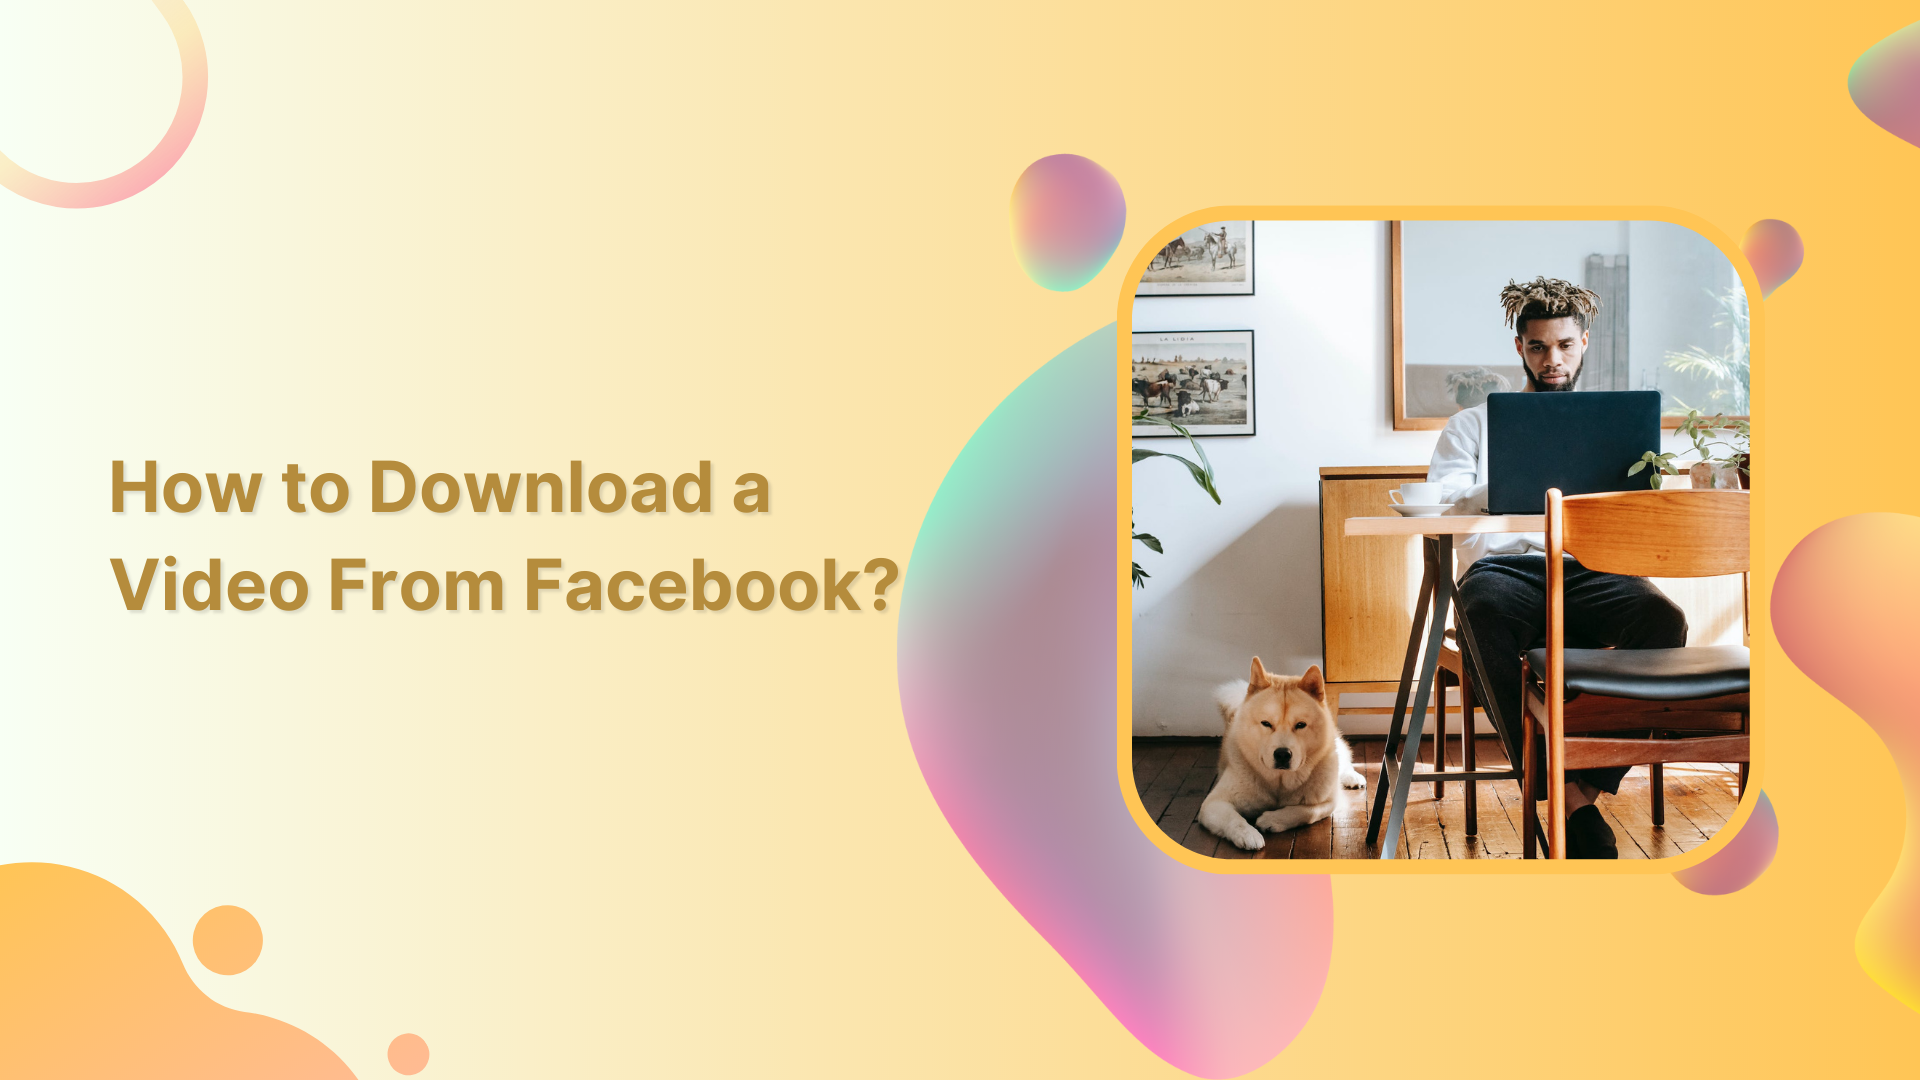 How to Download a Video from Facebook?